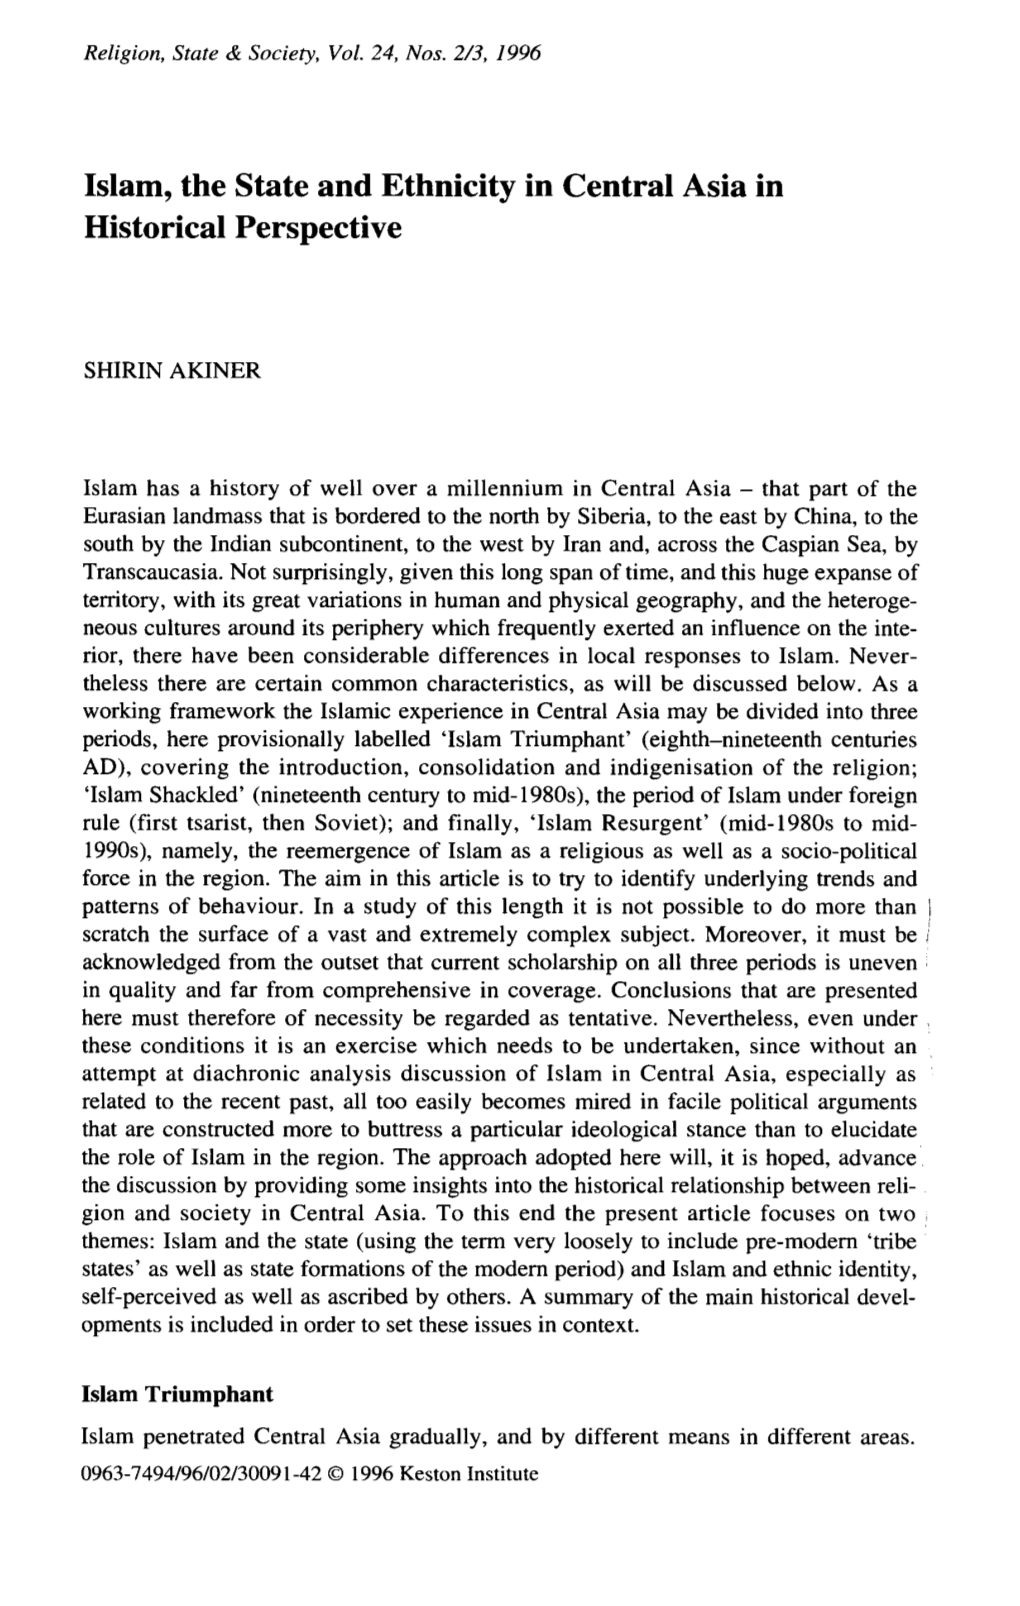 Islam, the State and Ethnicity in Central Asia in Historical Perspective